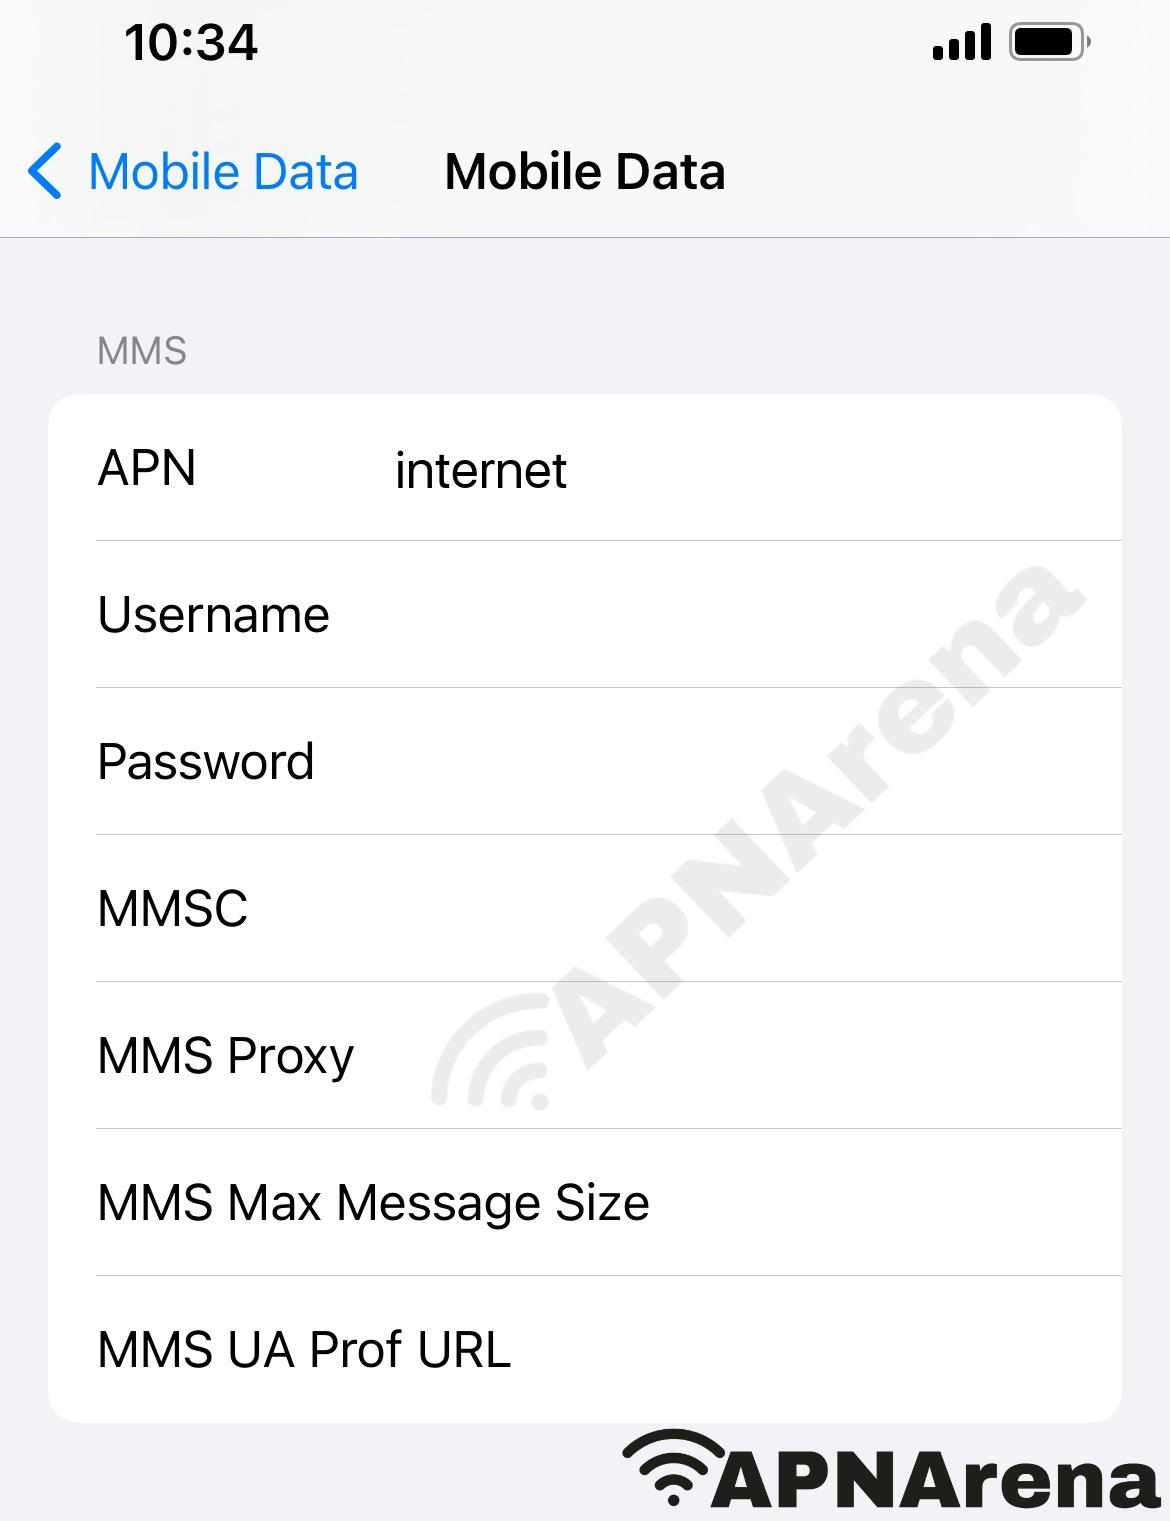 Yes 4G MMS Settings for iPhone